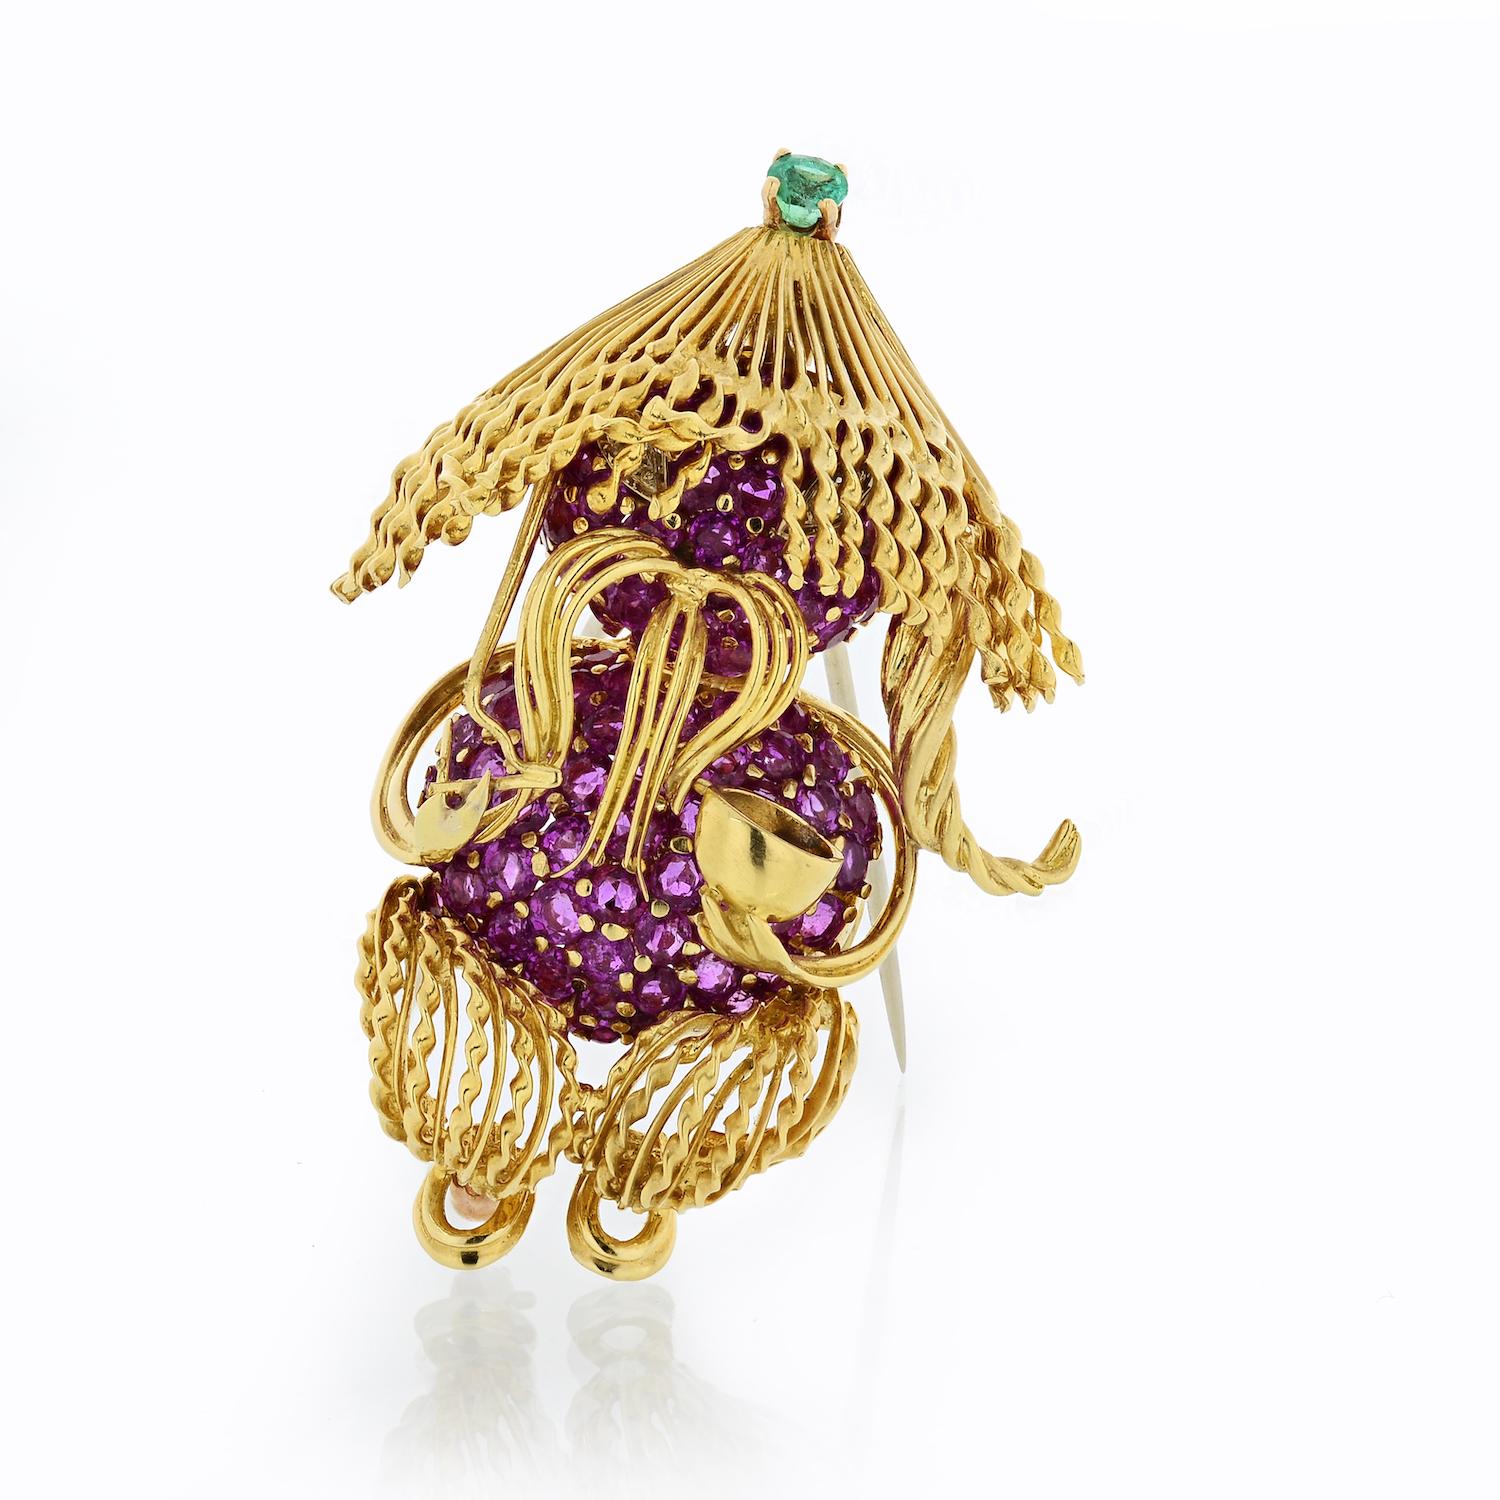 Tiffany & Co.
Gold 18k Yellow Brooch with Pink Sapphires By Jean Schlumberger

Yellow Gold Brooch from Tiffany & Co. designed by Jean Schlumberger.
Encrusted with pink sapphires, mounted with one green emerald this pin resembles a man eating noodles